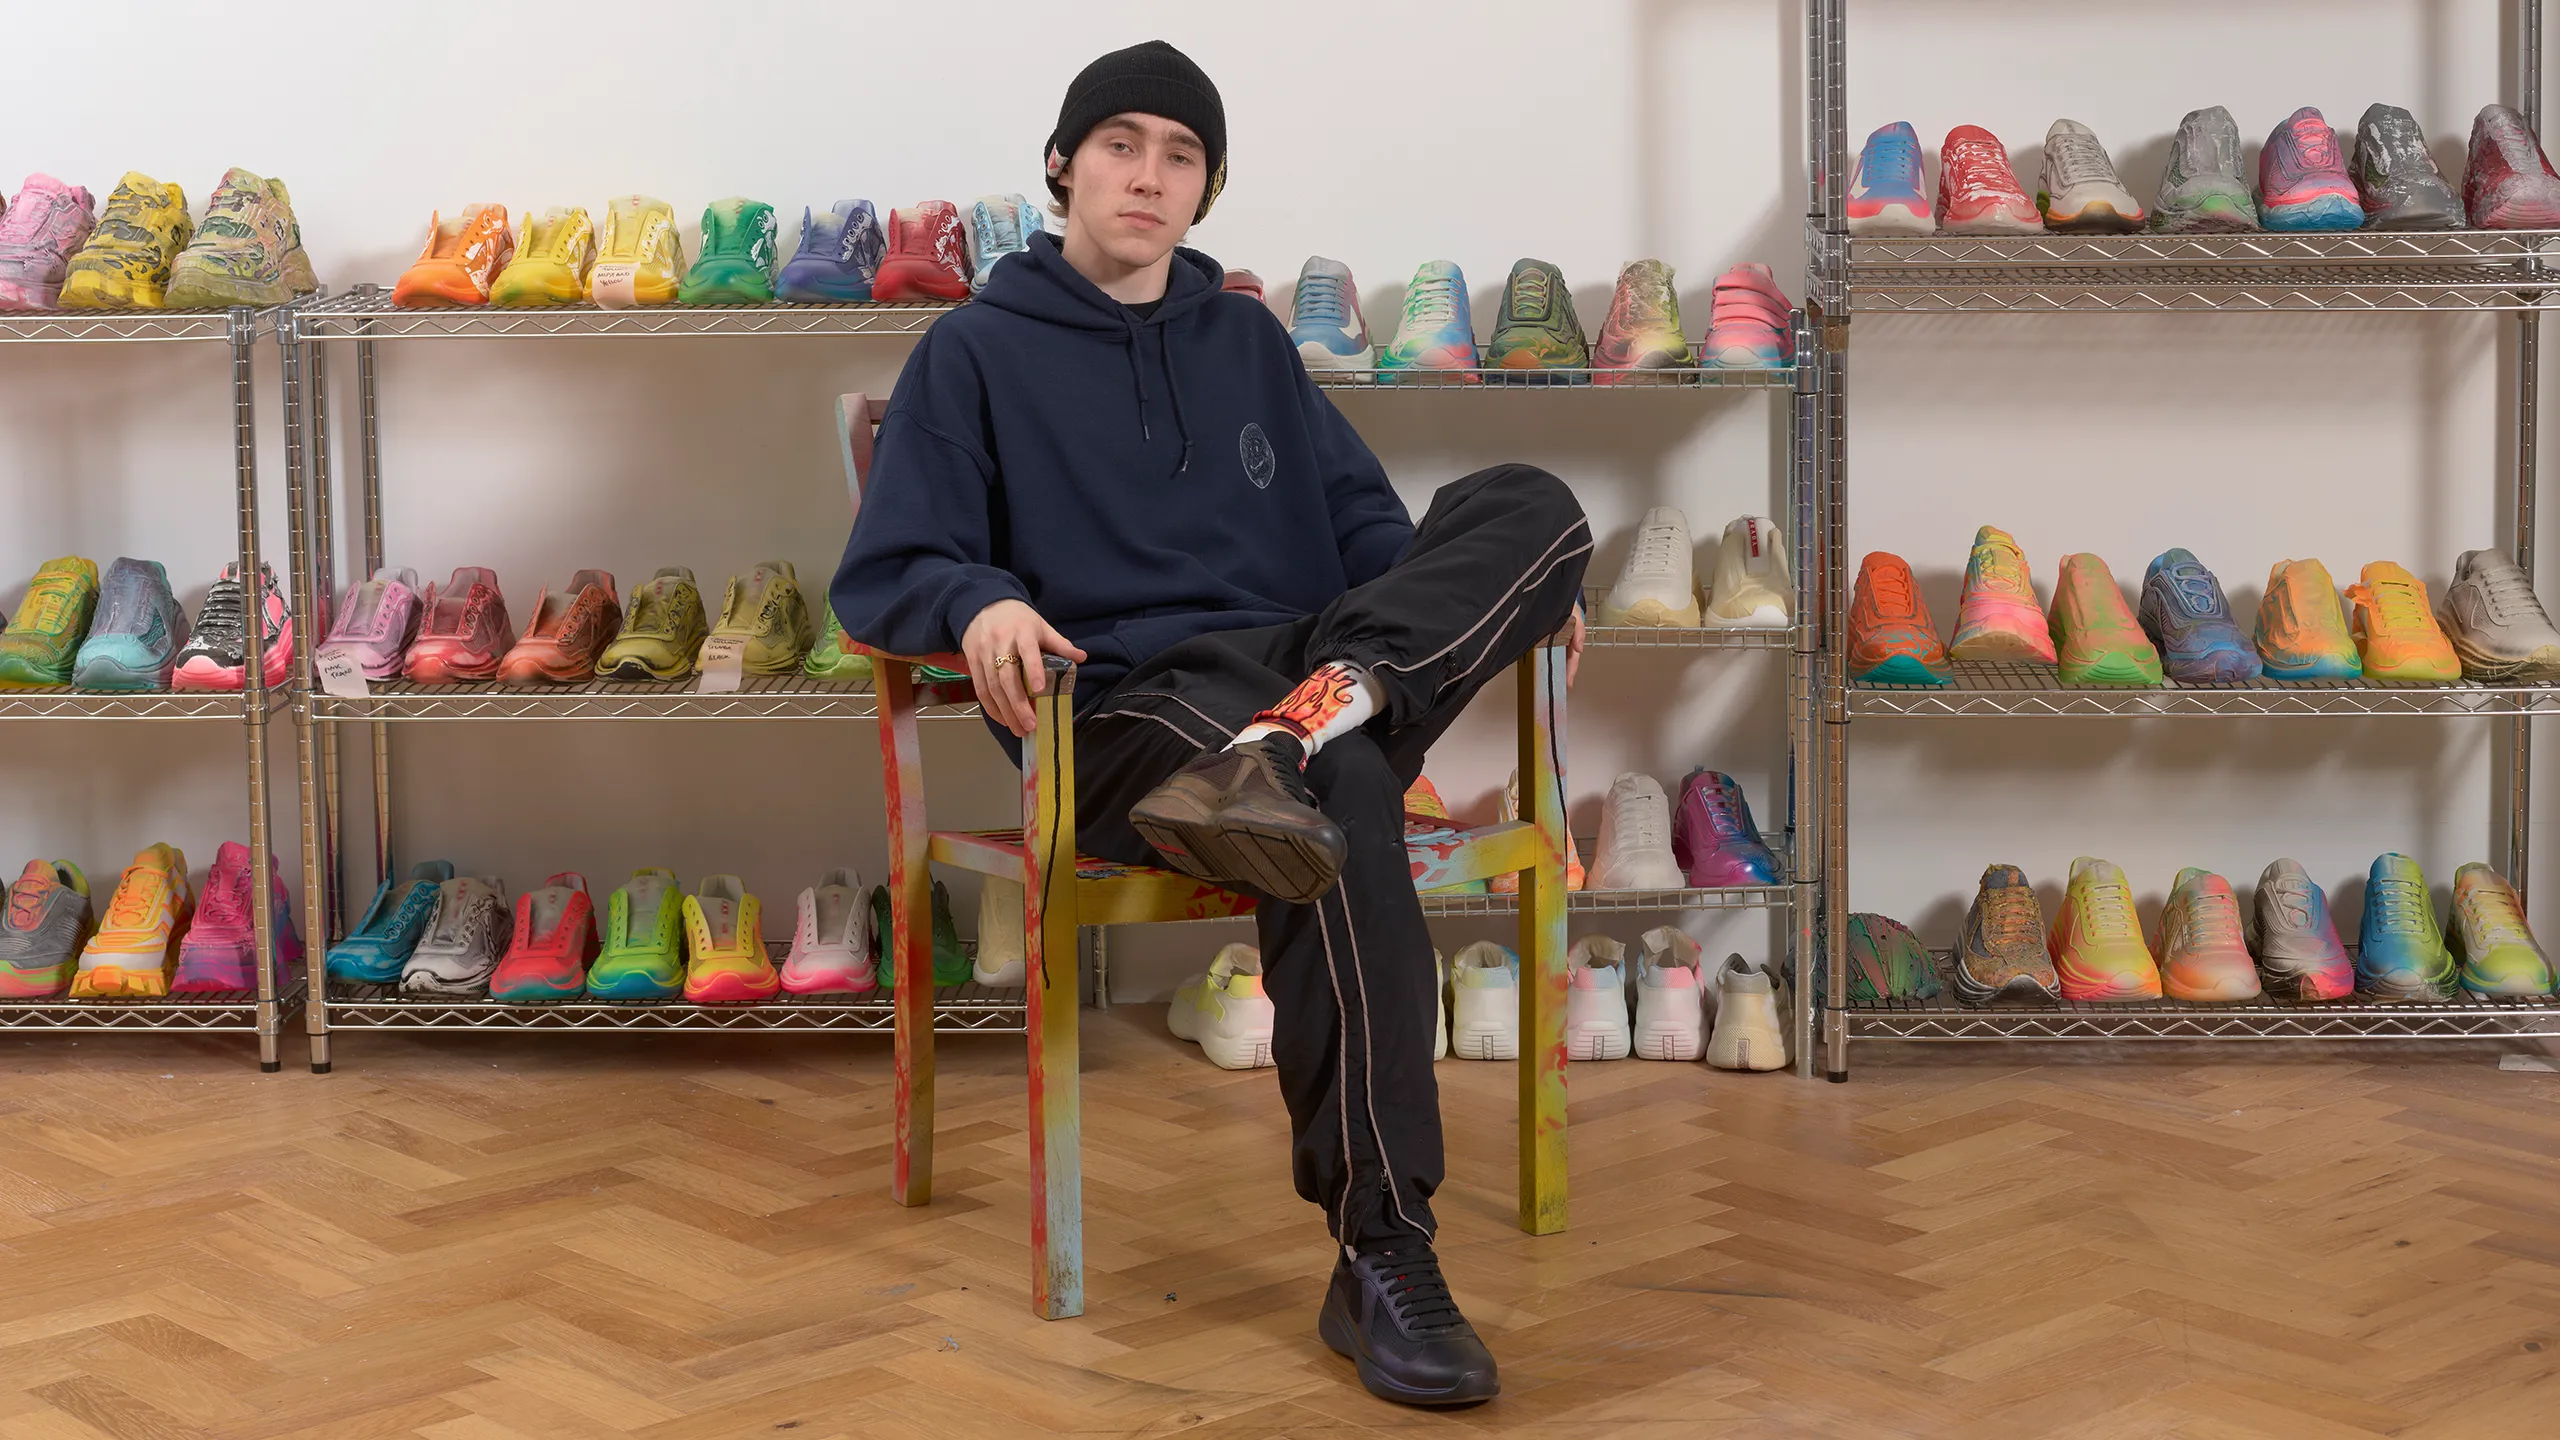 Prada's NFT is designed by Cassius Hirst, sitting in this image amongst his custom shoes.